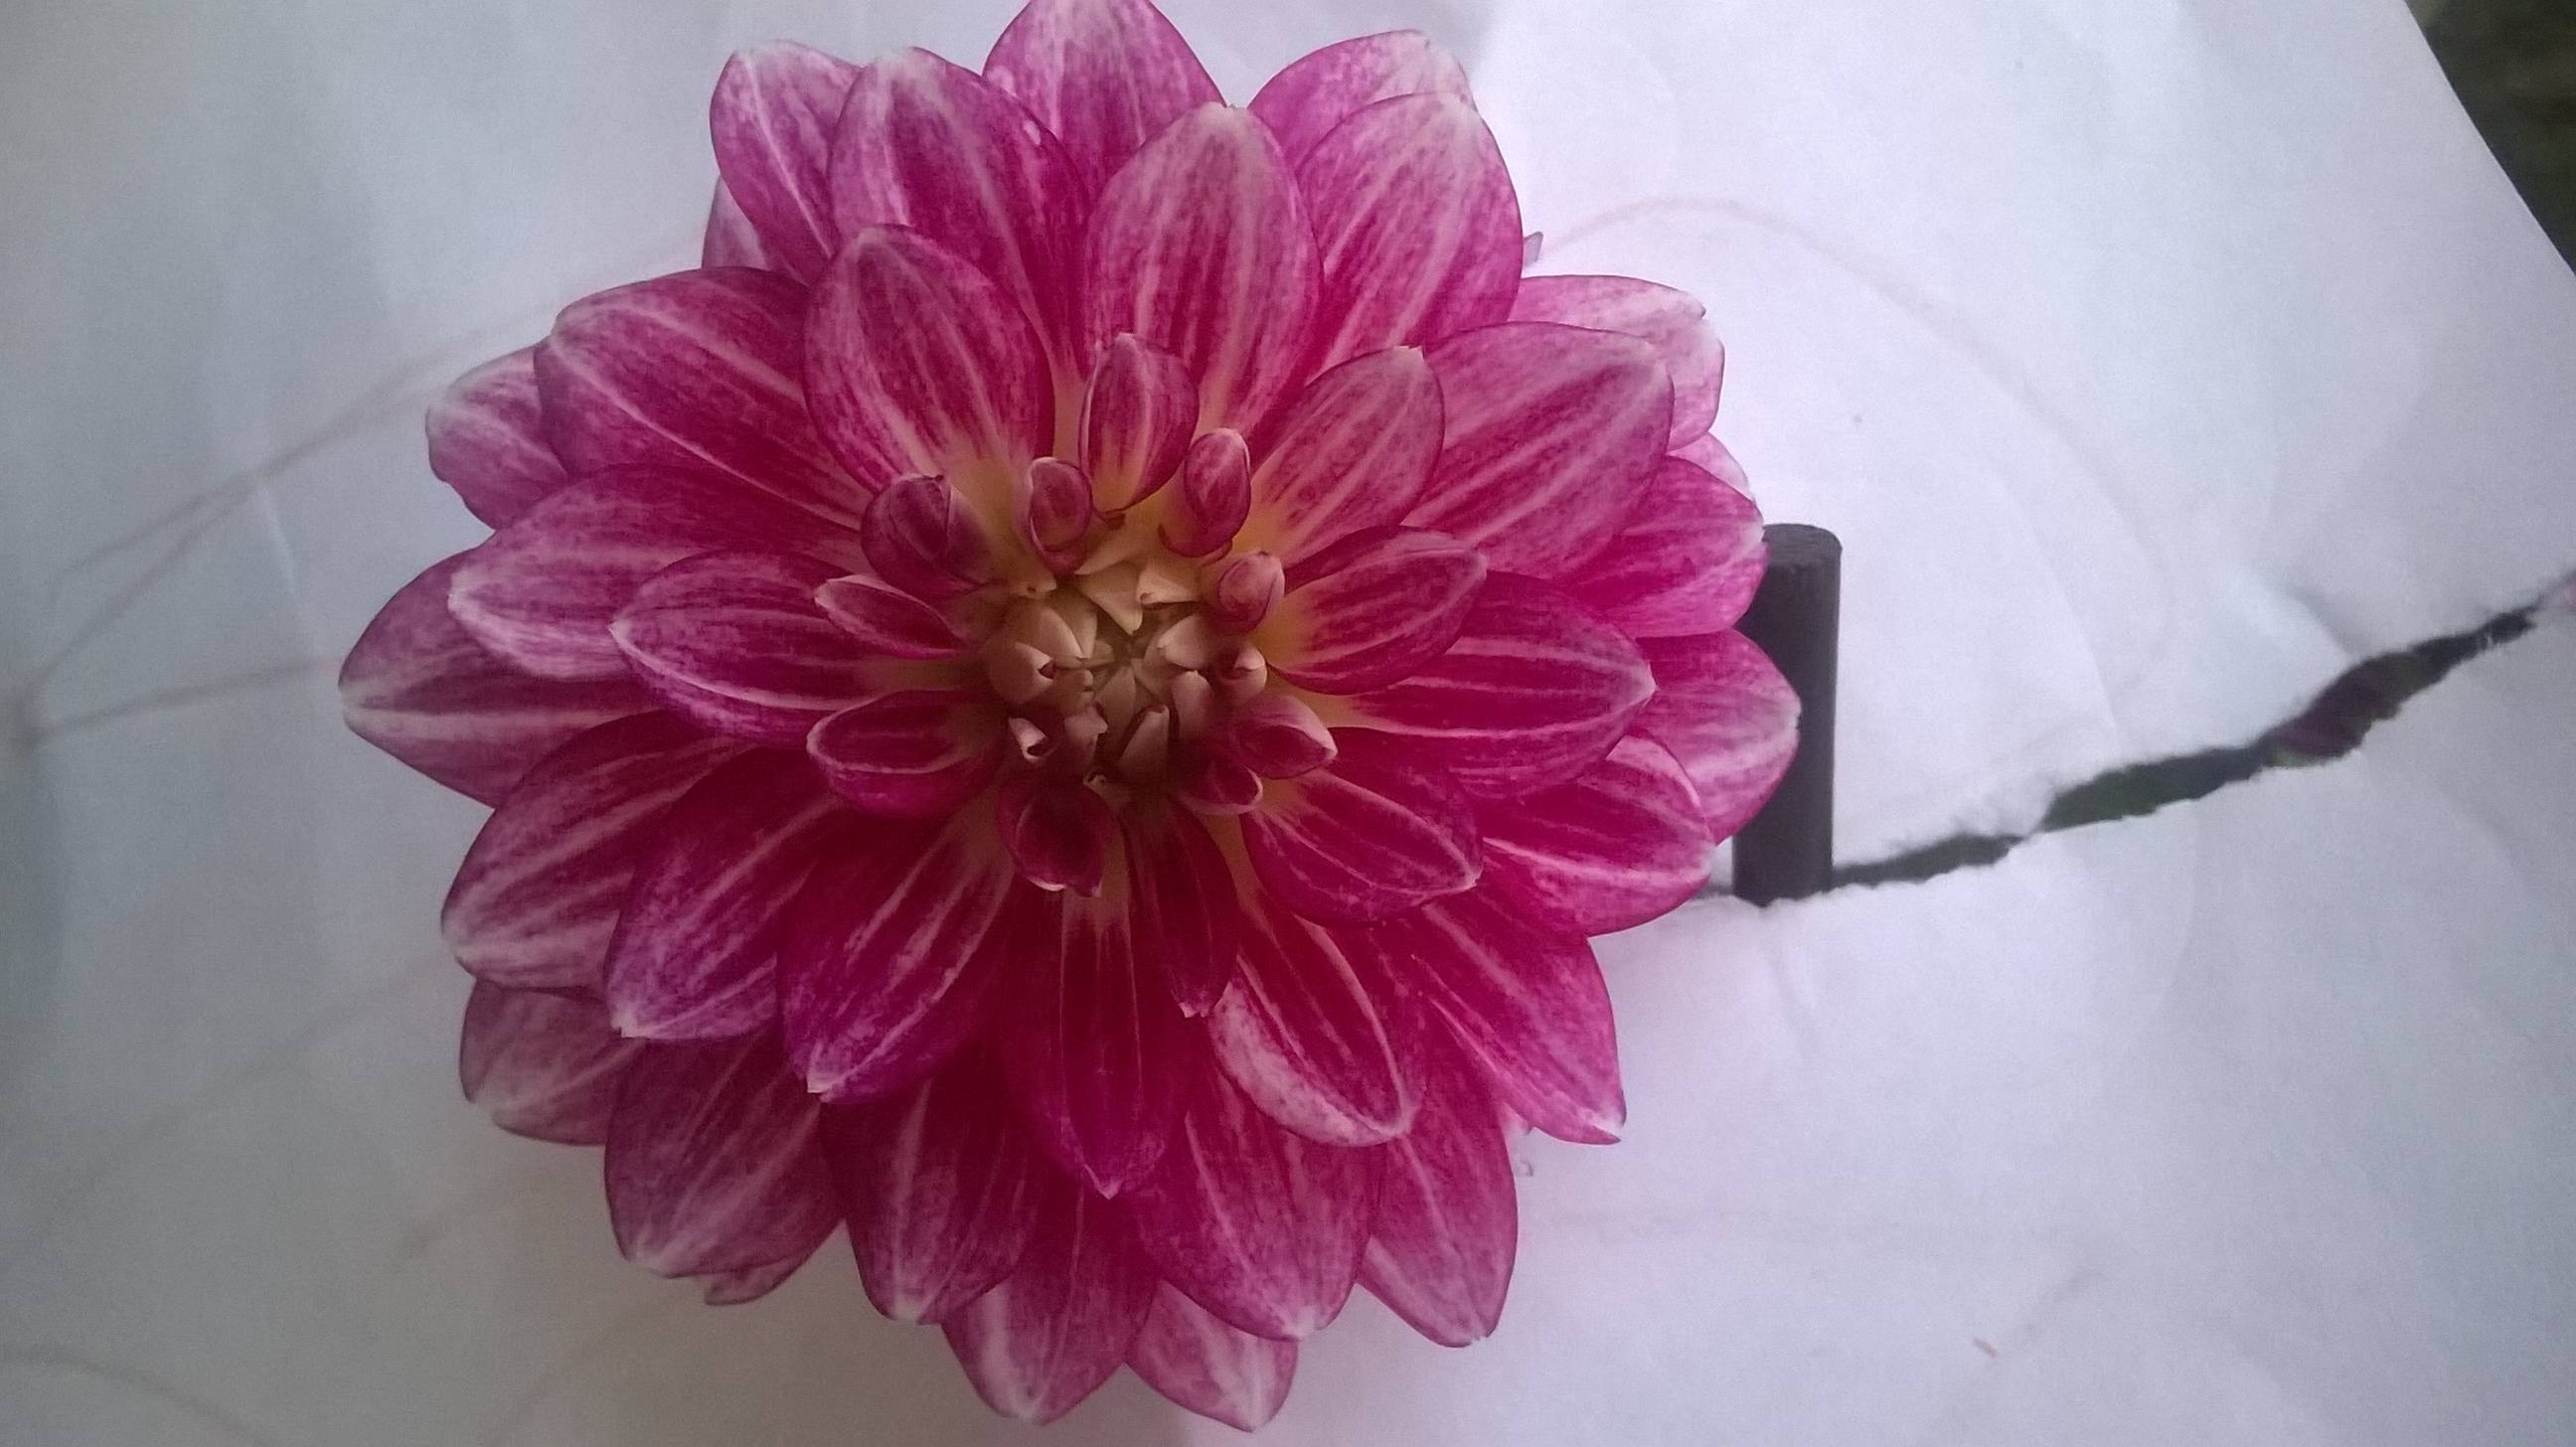 identification - What is this double pink/purple flower growing from ...